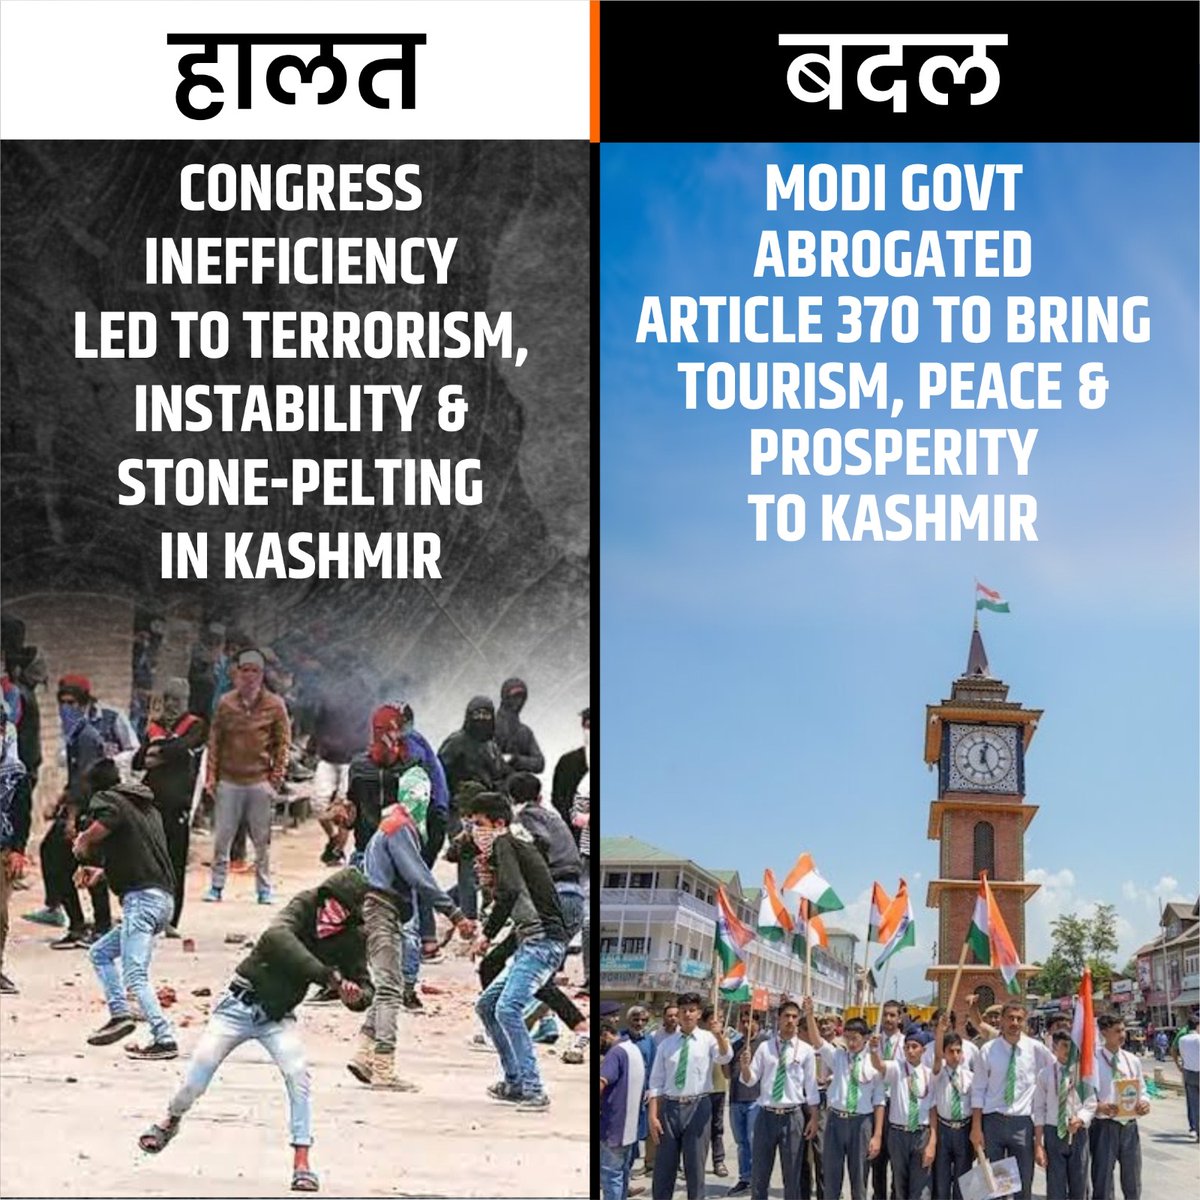 Congress encouraged separatists and neglected to address terrorism in Kashmir for years, resulting in a state of fear and lawlessness. Prime Minister Shri @narendrmodi Ji's decision to abrogate Article 370 brought about a positive transformation, fostering peace and prosperity in…